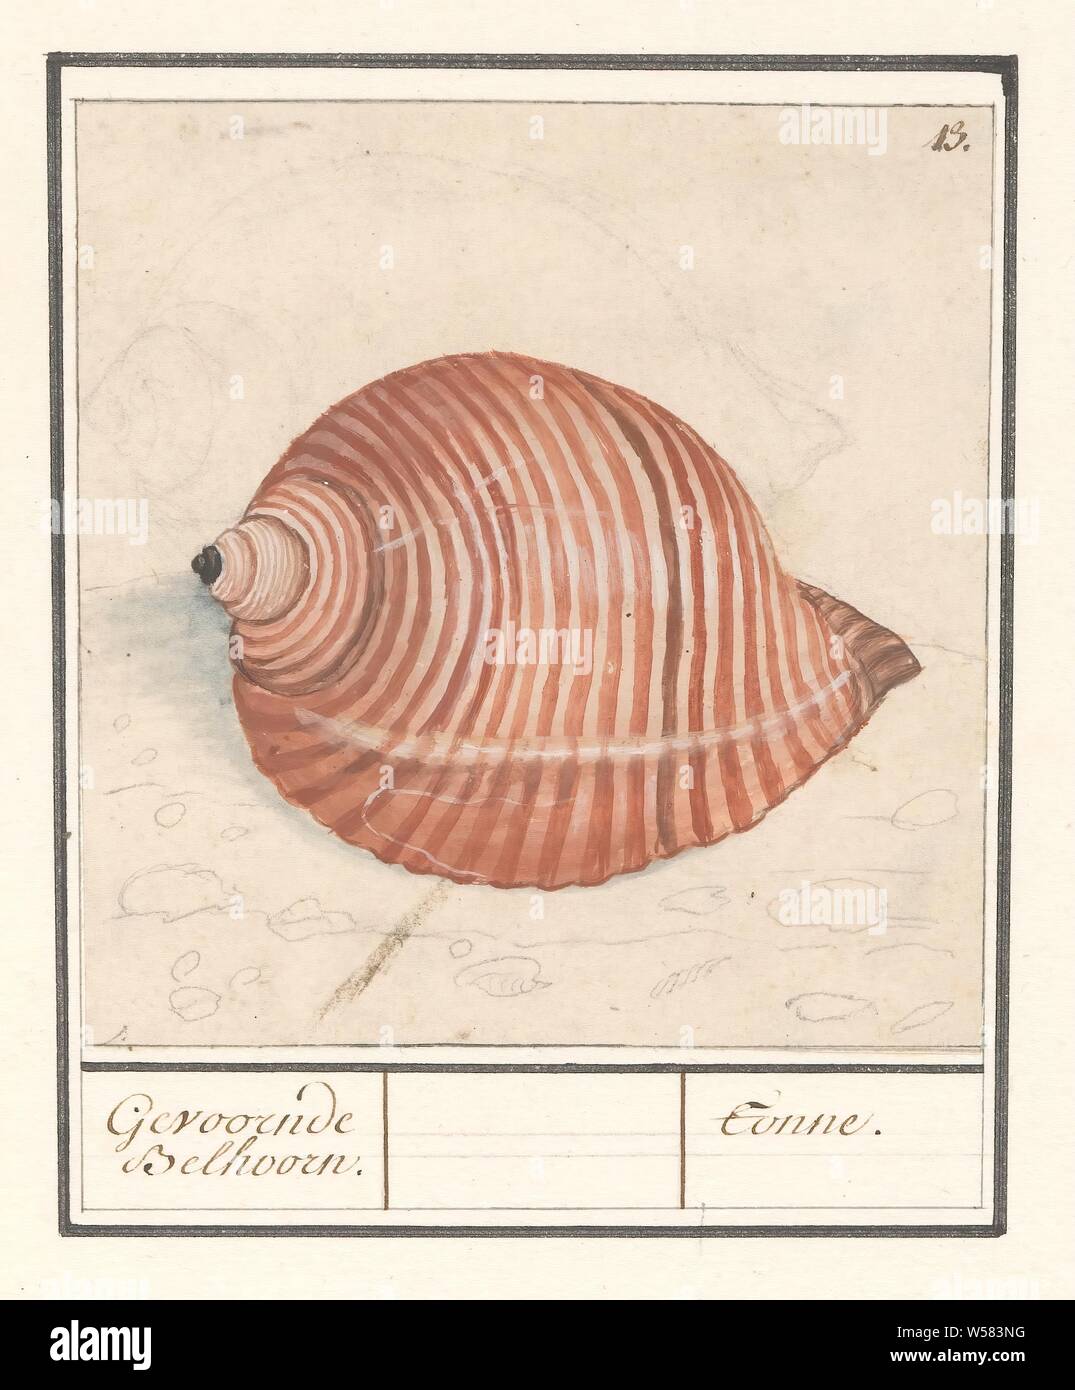 Shell of a sea snail, Gevoornde Belhoorn. / Tonne, Shell of a sea snail. Numbered top right: 13. Part of the sixth album with drawings of fish, shells and insects. Sixth of twelve albums with drawings of animals, birds and plants known around 1600, commissioned by Emperor Rudolf II. With explanations in Dutch, Latin and French, molluscs (shell, snail-shell etc.), Anselmus Boetius de Boodt, 1596 - 1610, paper, pencil, chalk, watercolor (paint), deck paint, brush, h 121 mm × w 106 mm Stock Photo